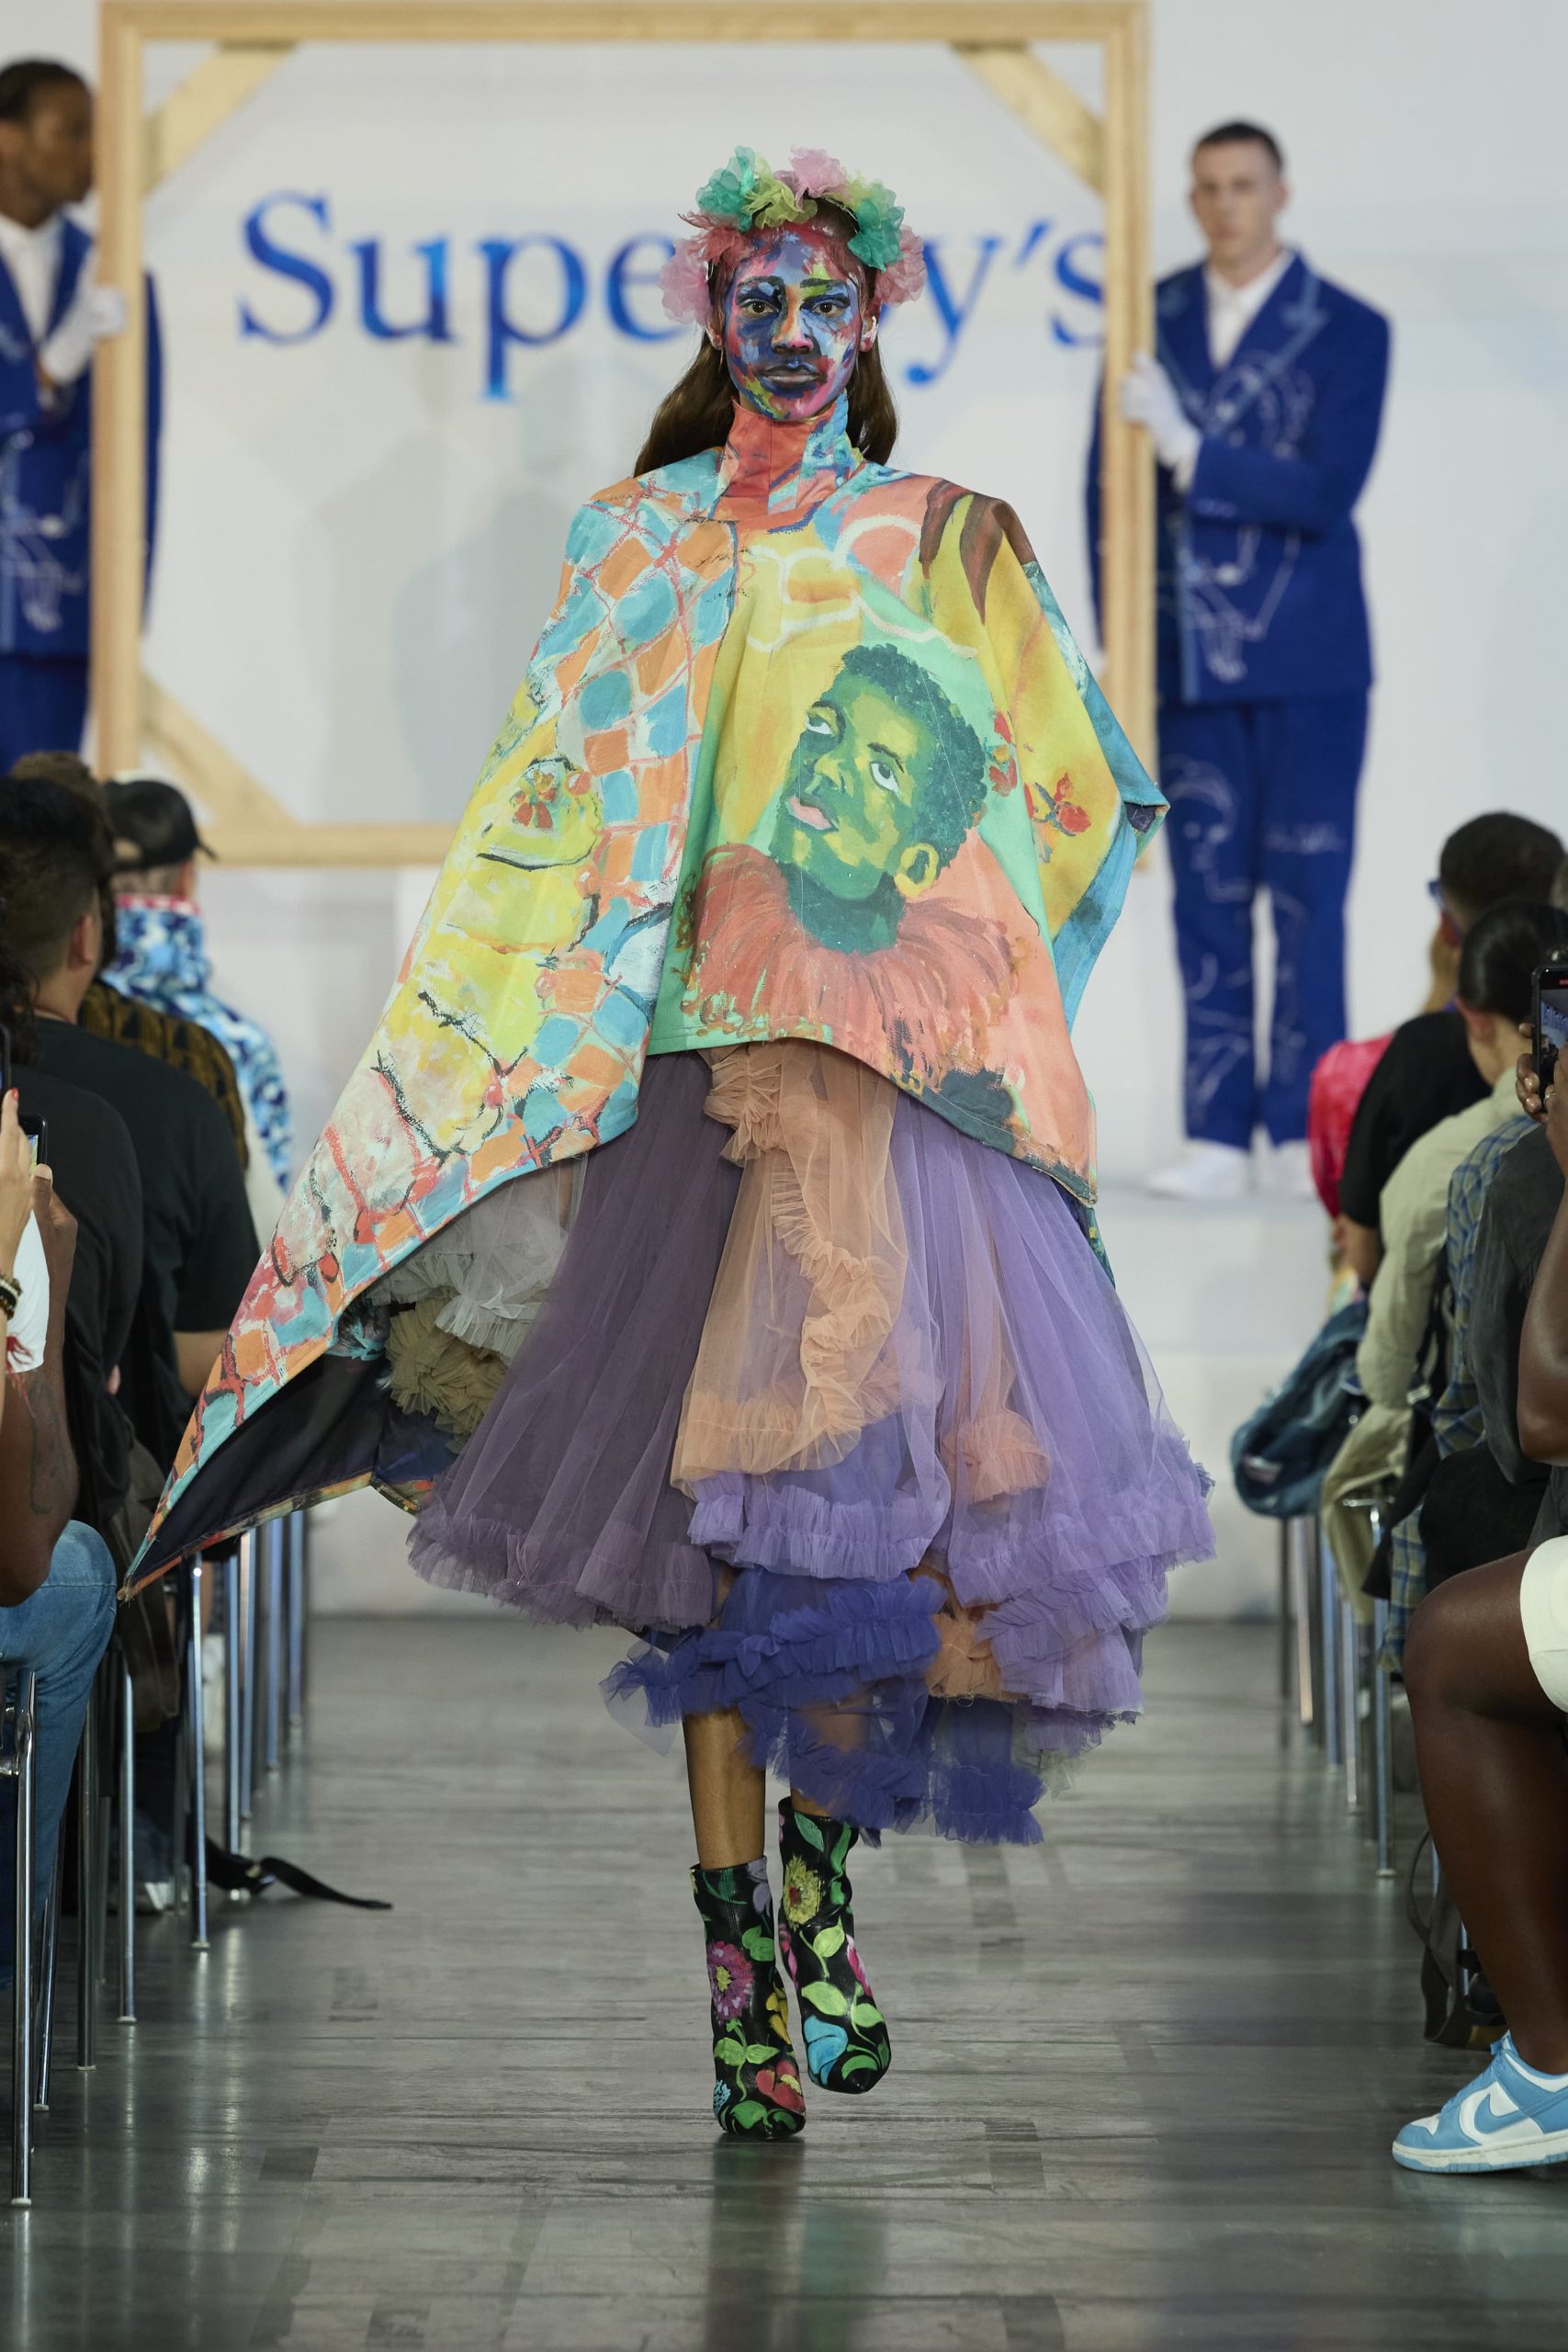 KIDSUPER, a creation by Colm Dillane – A Shaded View on Fashion